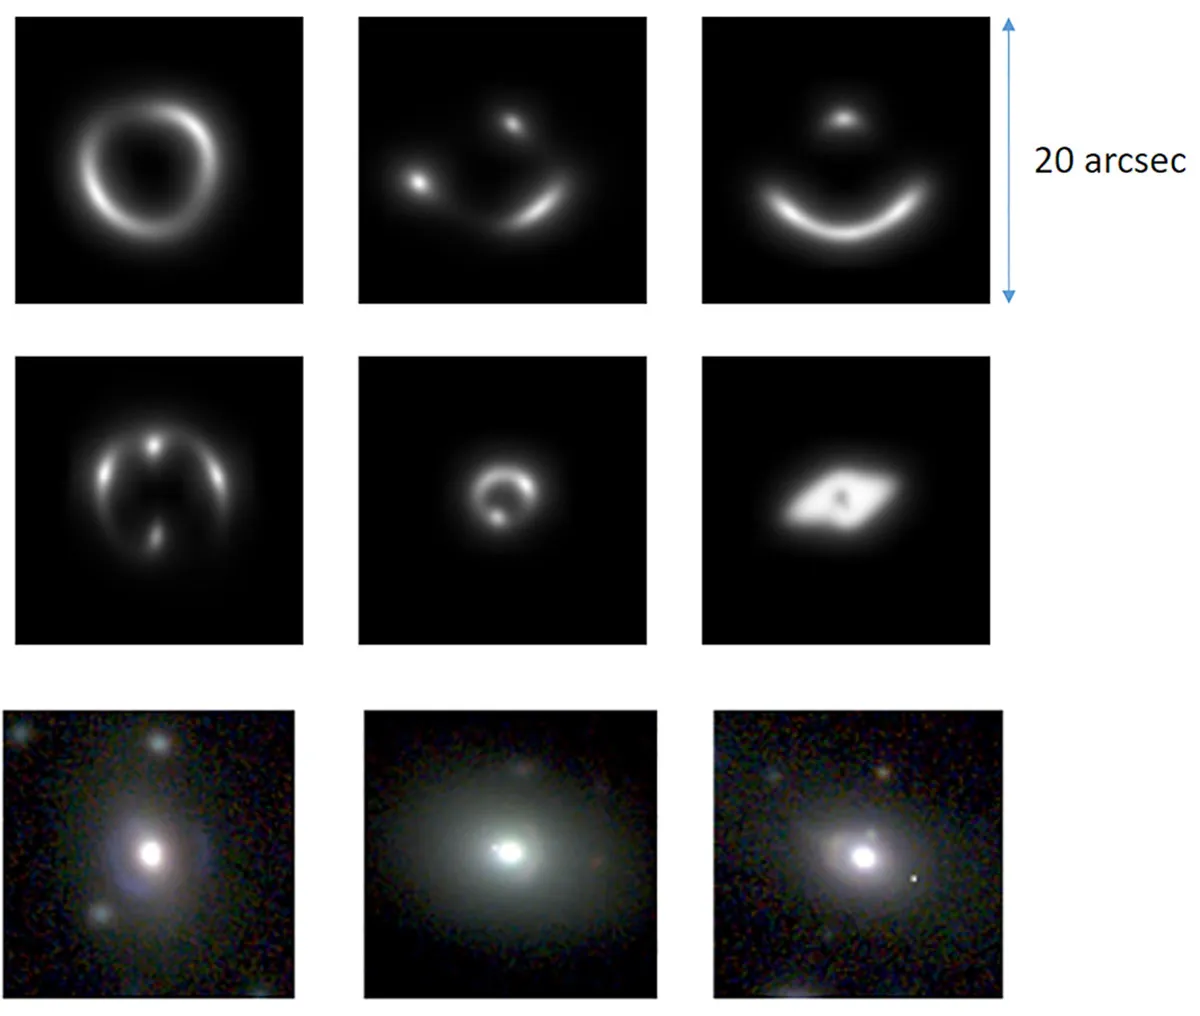 The top two rows show artificial photos of gravitational lensing that the astronomers used to train their AI. The bottom row shows actual gravitational lenses discovered by the computer. Credit: Credit: Carlo Enrico Petrillo (University of Groningen)